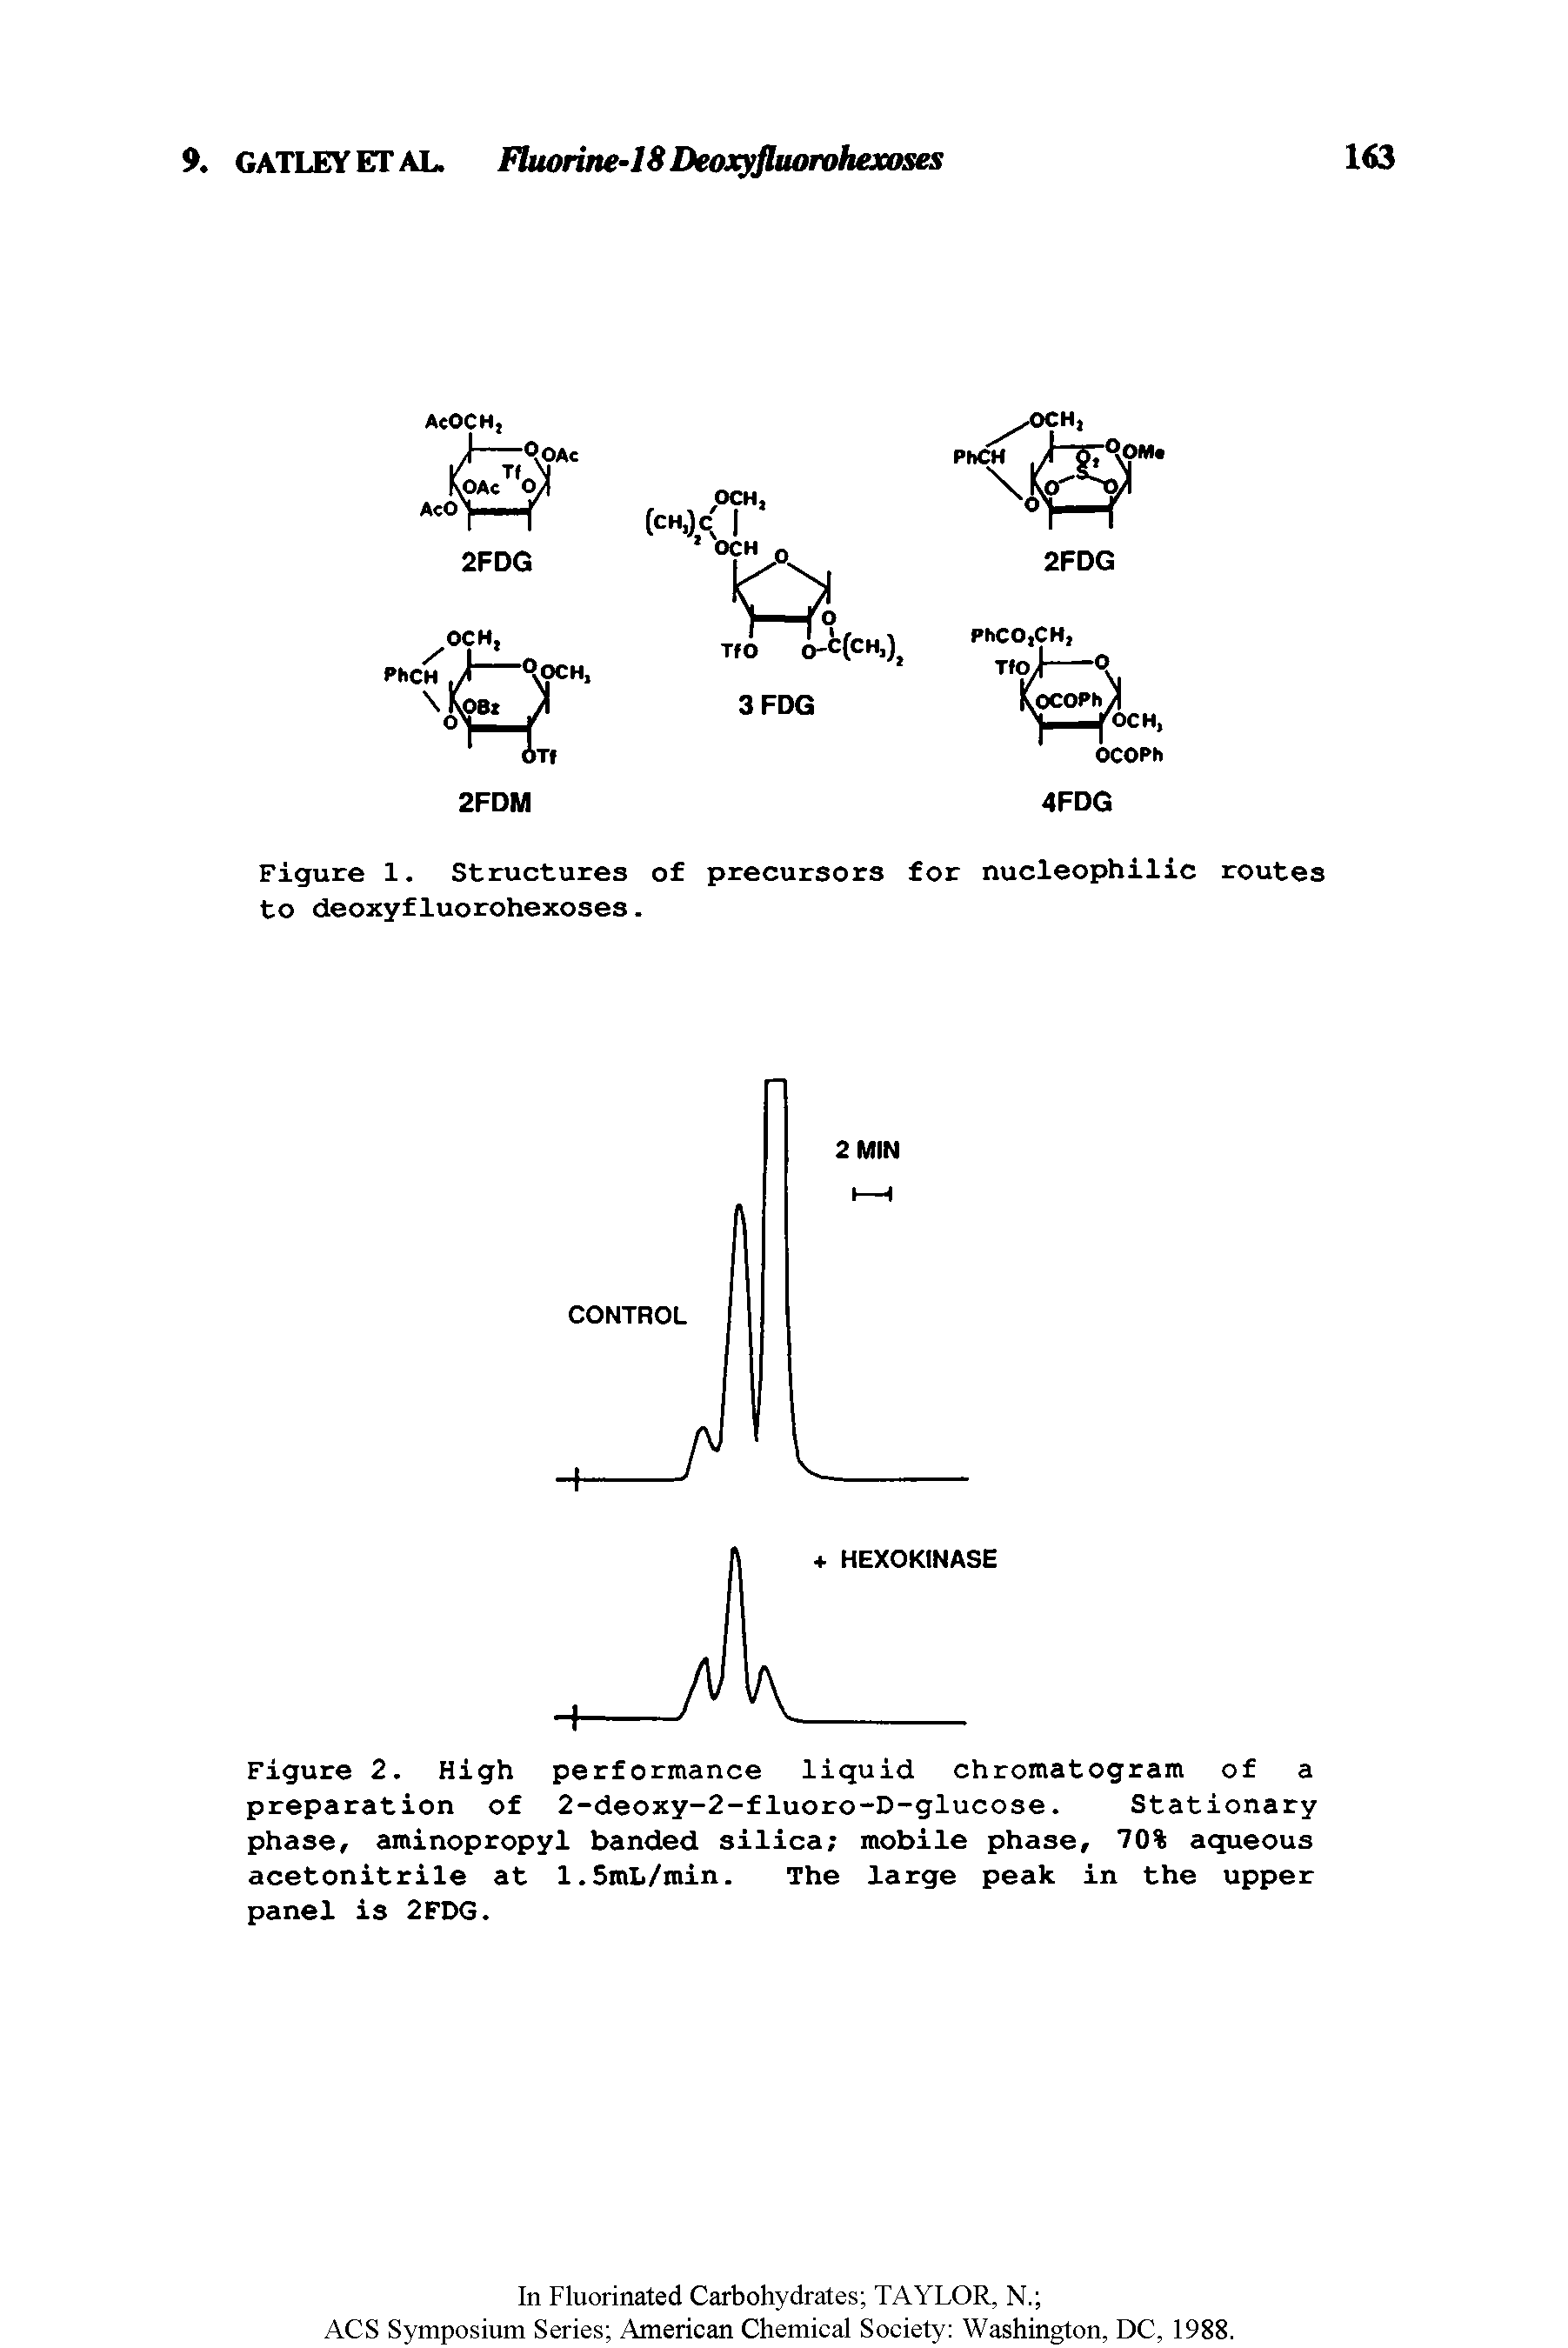 Figure 1. Structures of precursors for nucleophilic routes to deoxyfluorohexoses.